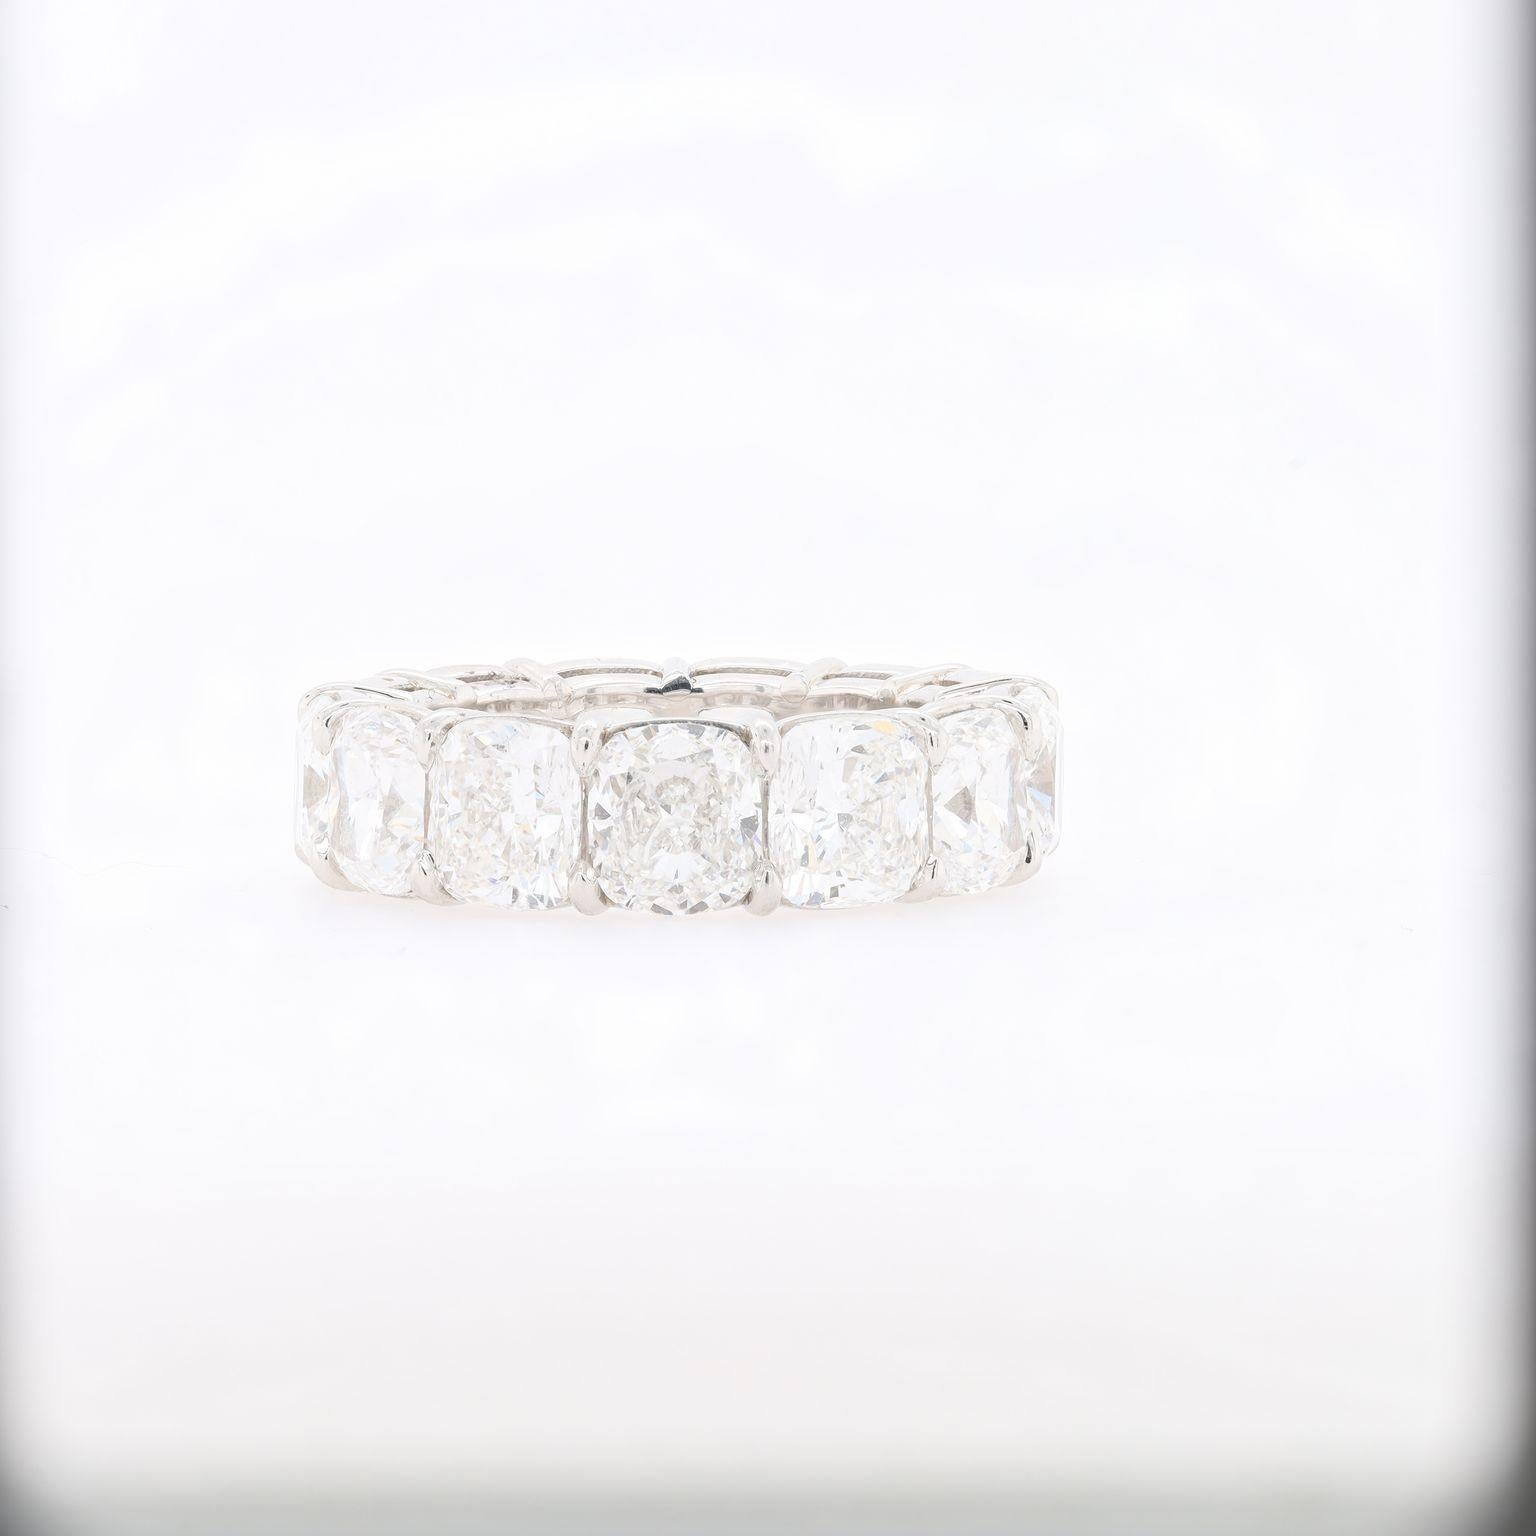 Cushion cut diamond eternity (all the way around) band, featuring 13 GIA certified cushion cut diamonds ranging from D,E,F in color and VS in clarity - total weight is 13.27 carats 